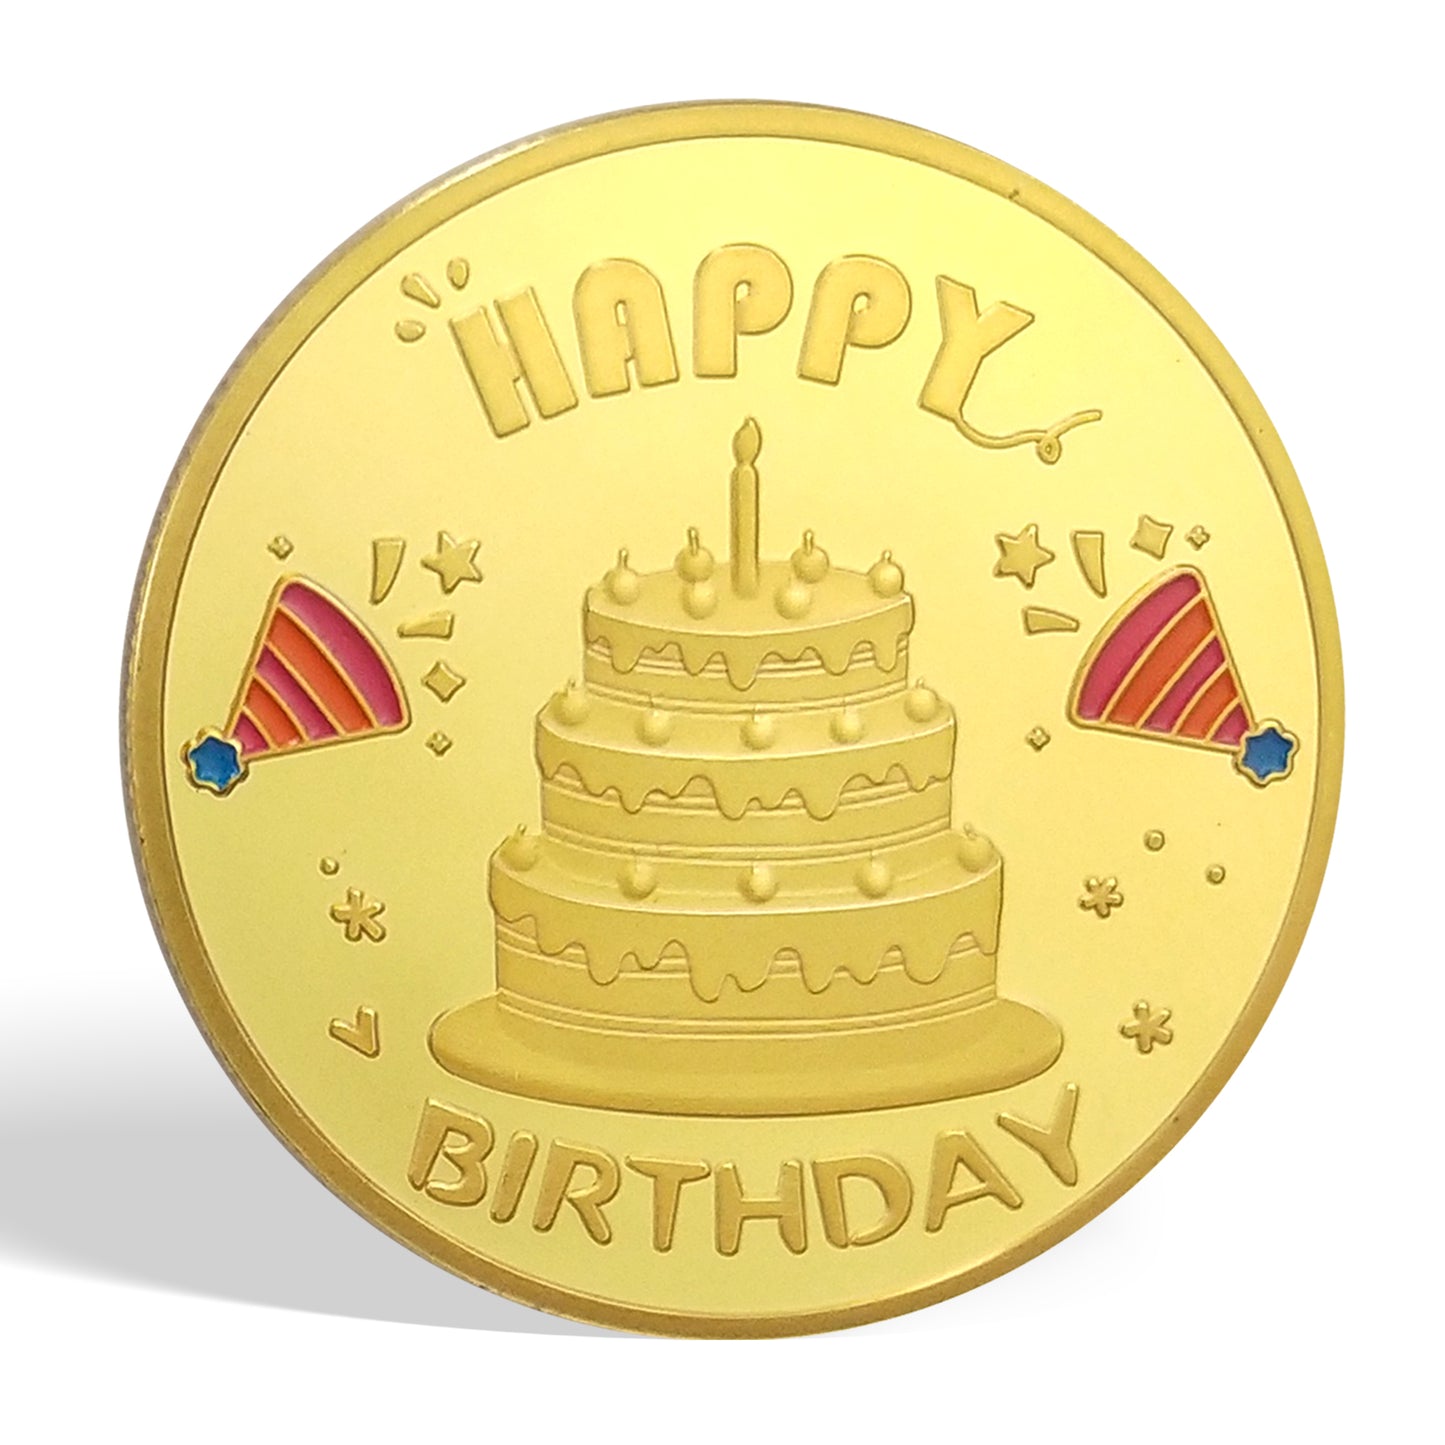 Happy Birthday Coin -Laughing and crying cake